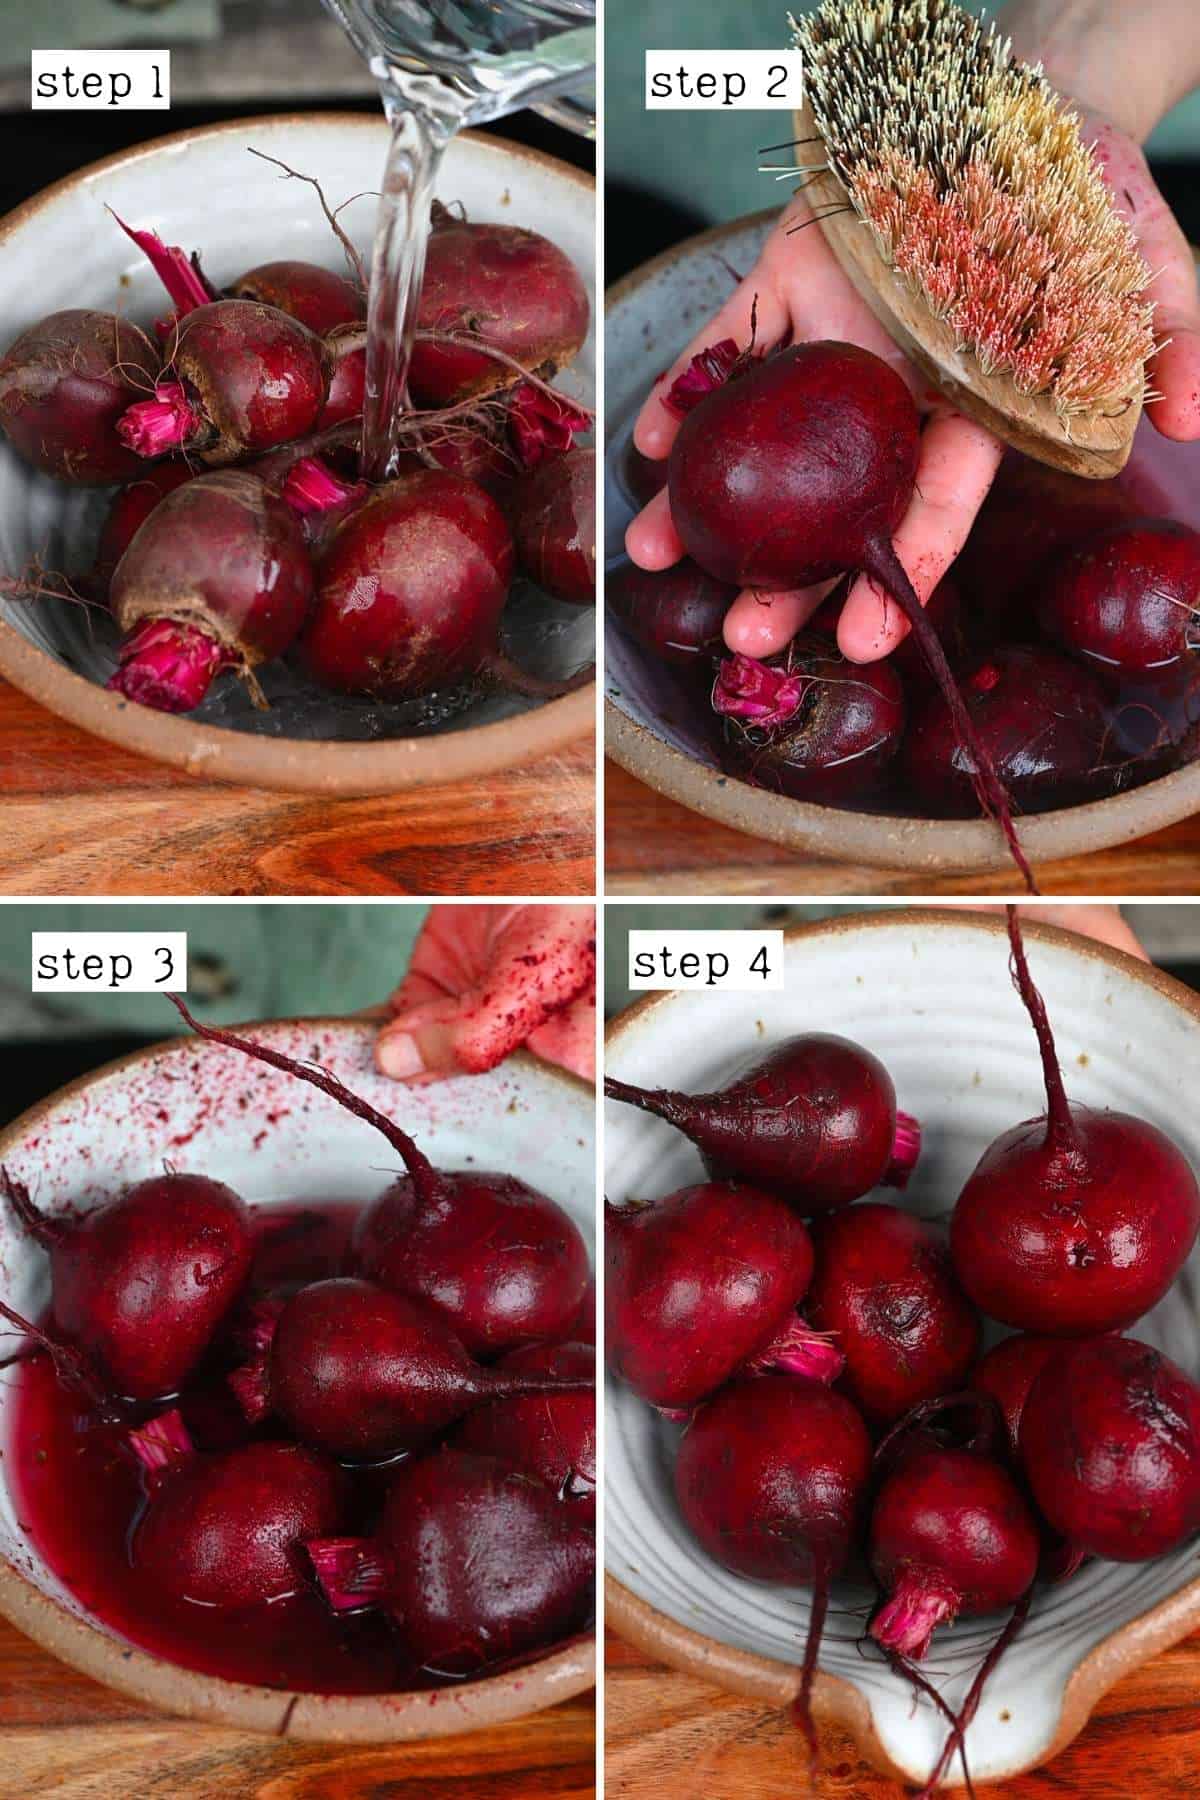 Steps for cleaning beetroot